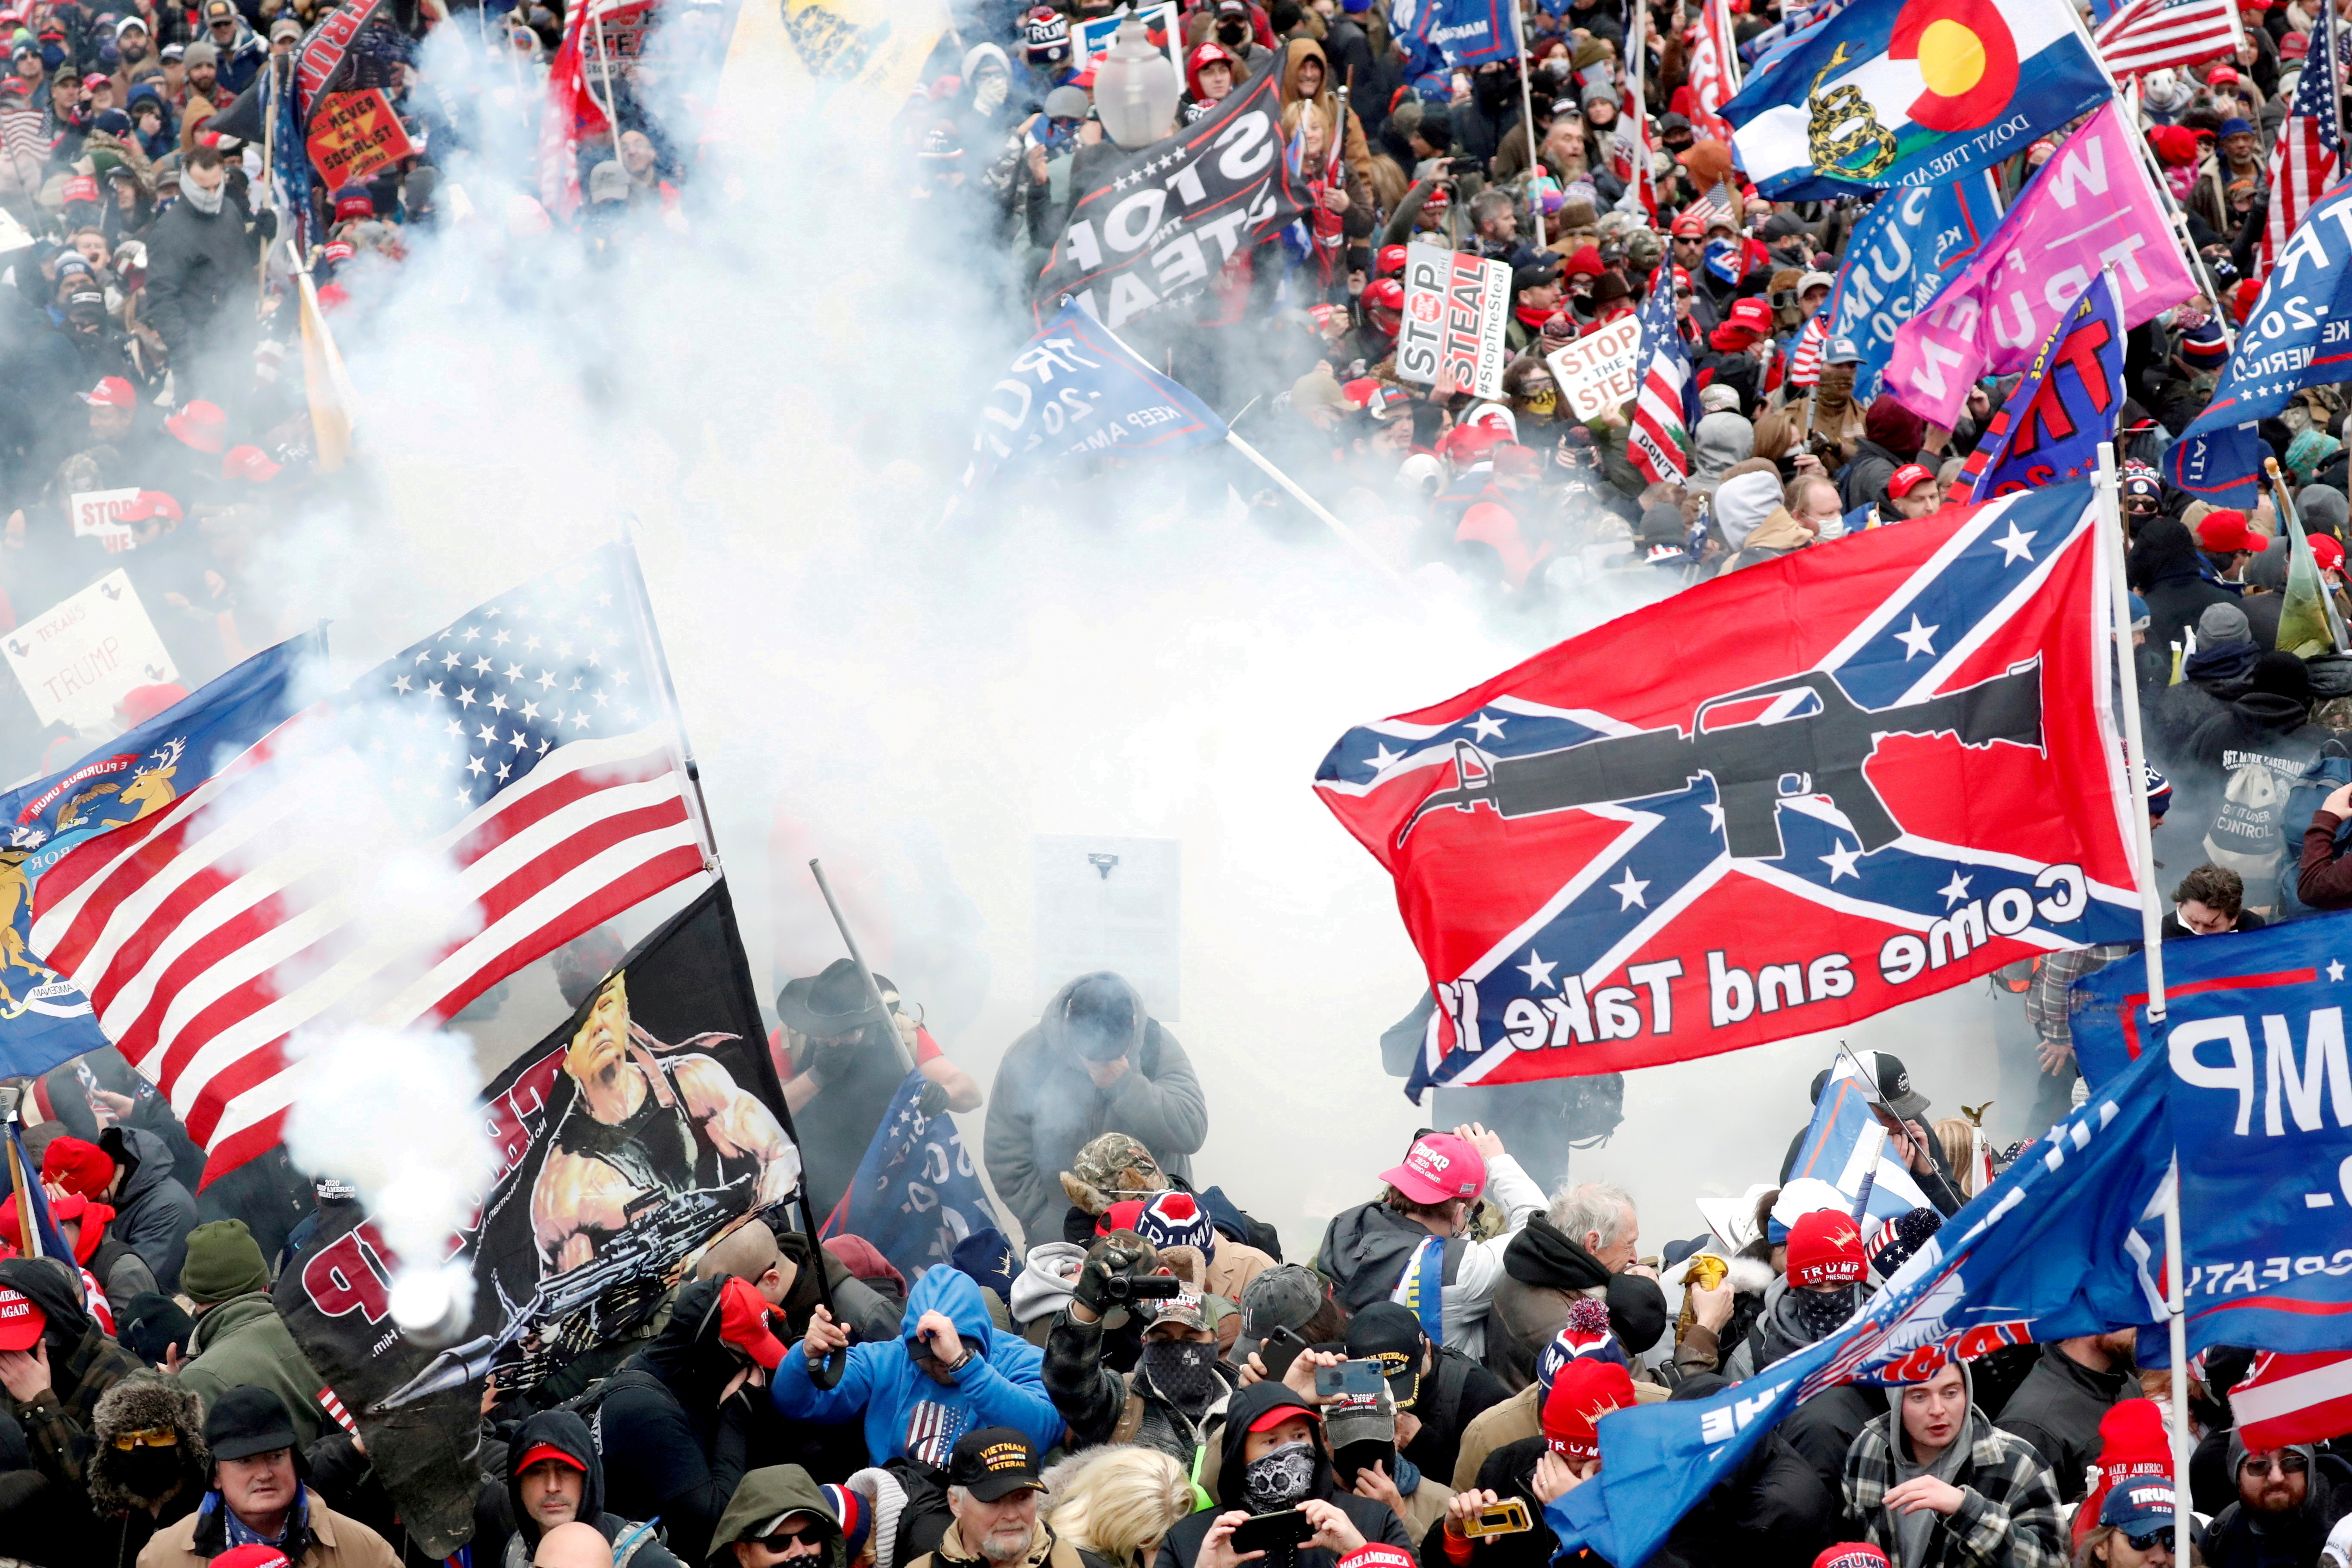 Tear gas is released into a crowd of protesters, with one wielding a Confederate battle flag that reads 